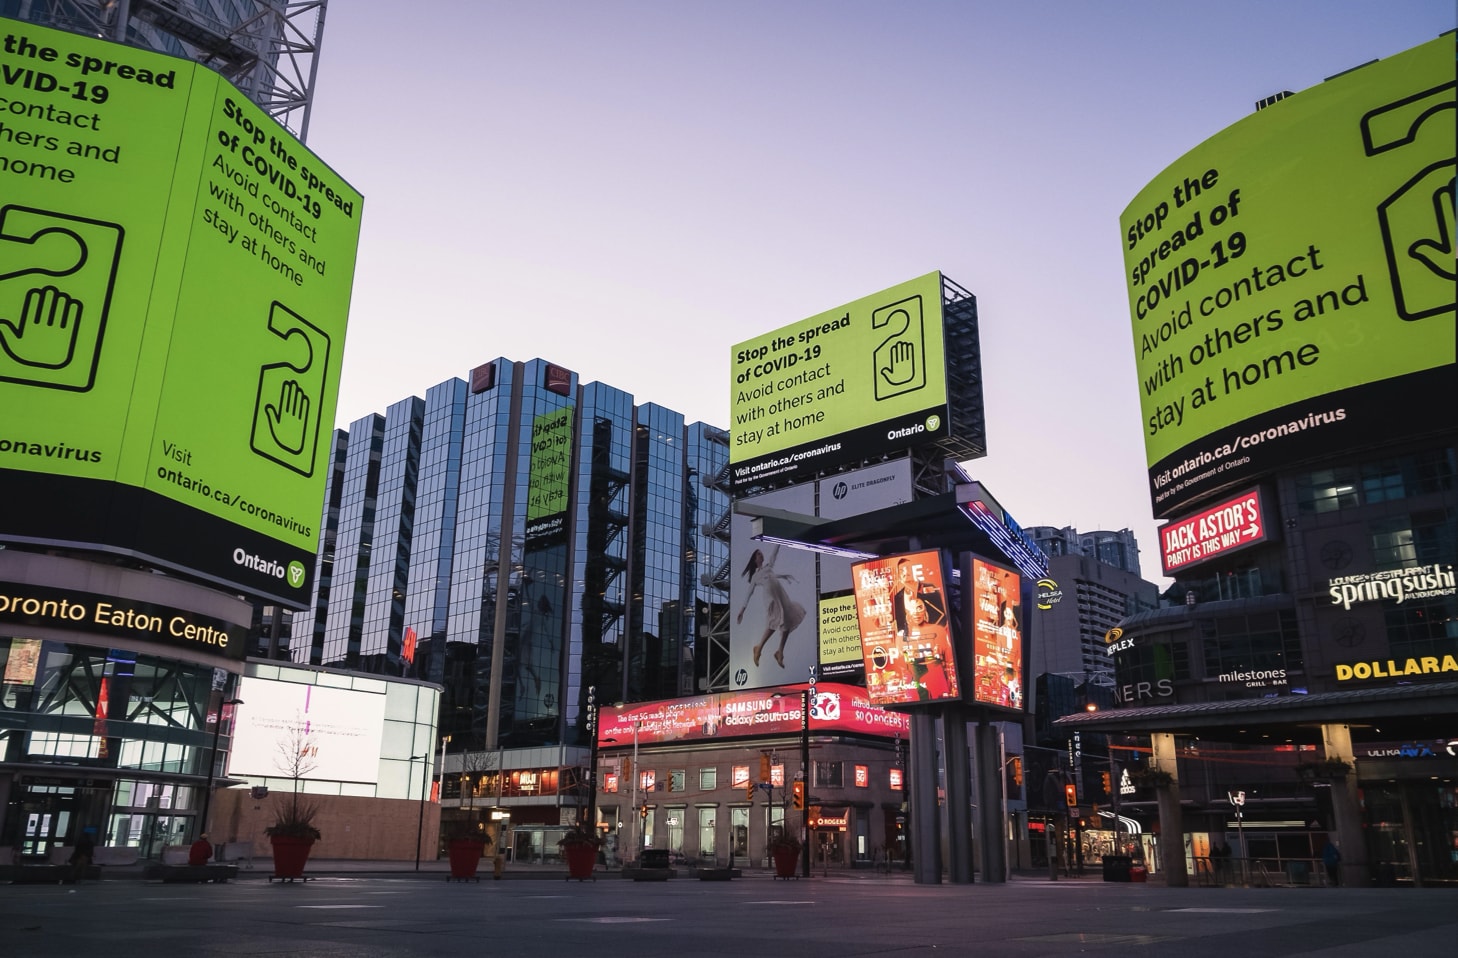 Yonge and Dundas Square billboard takeover with COVID-19 health messaging.